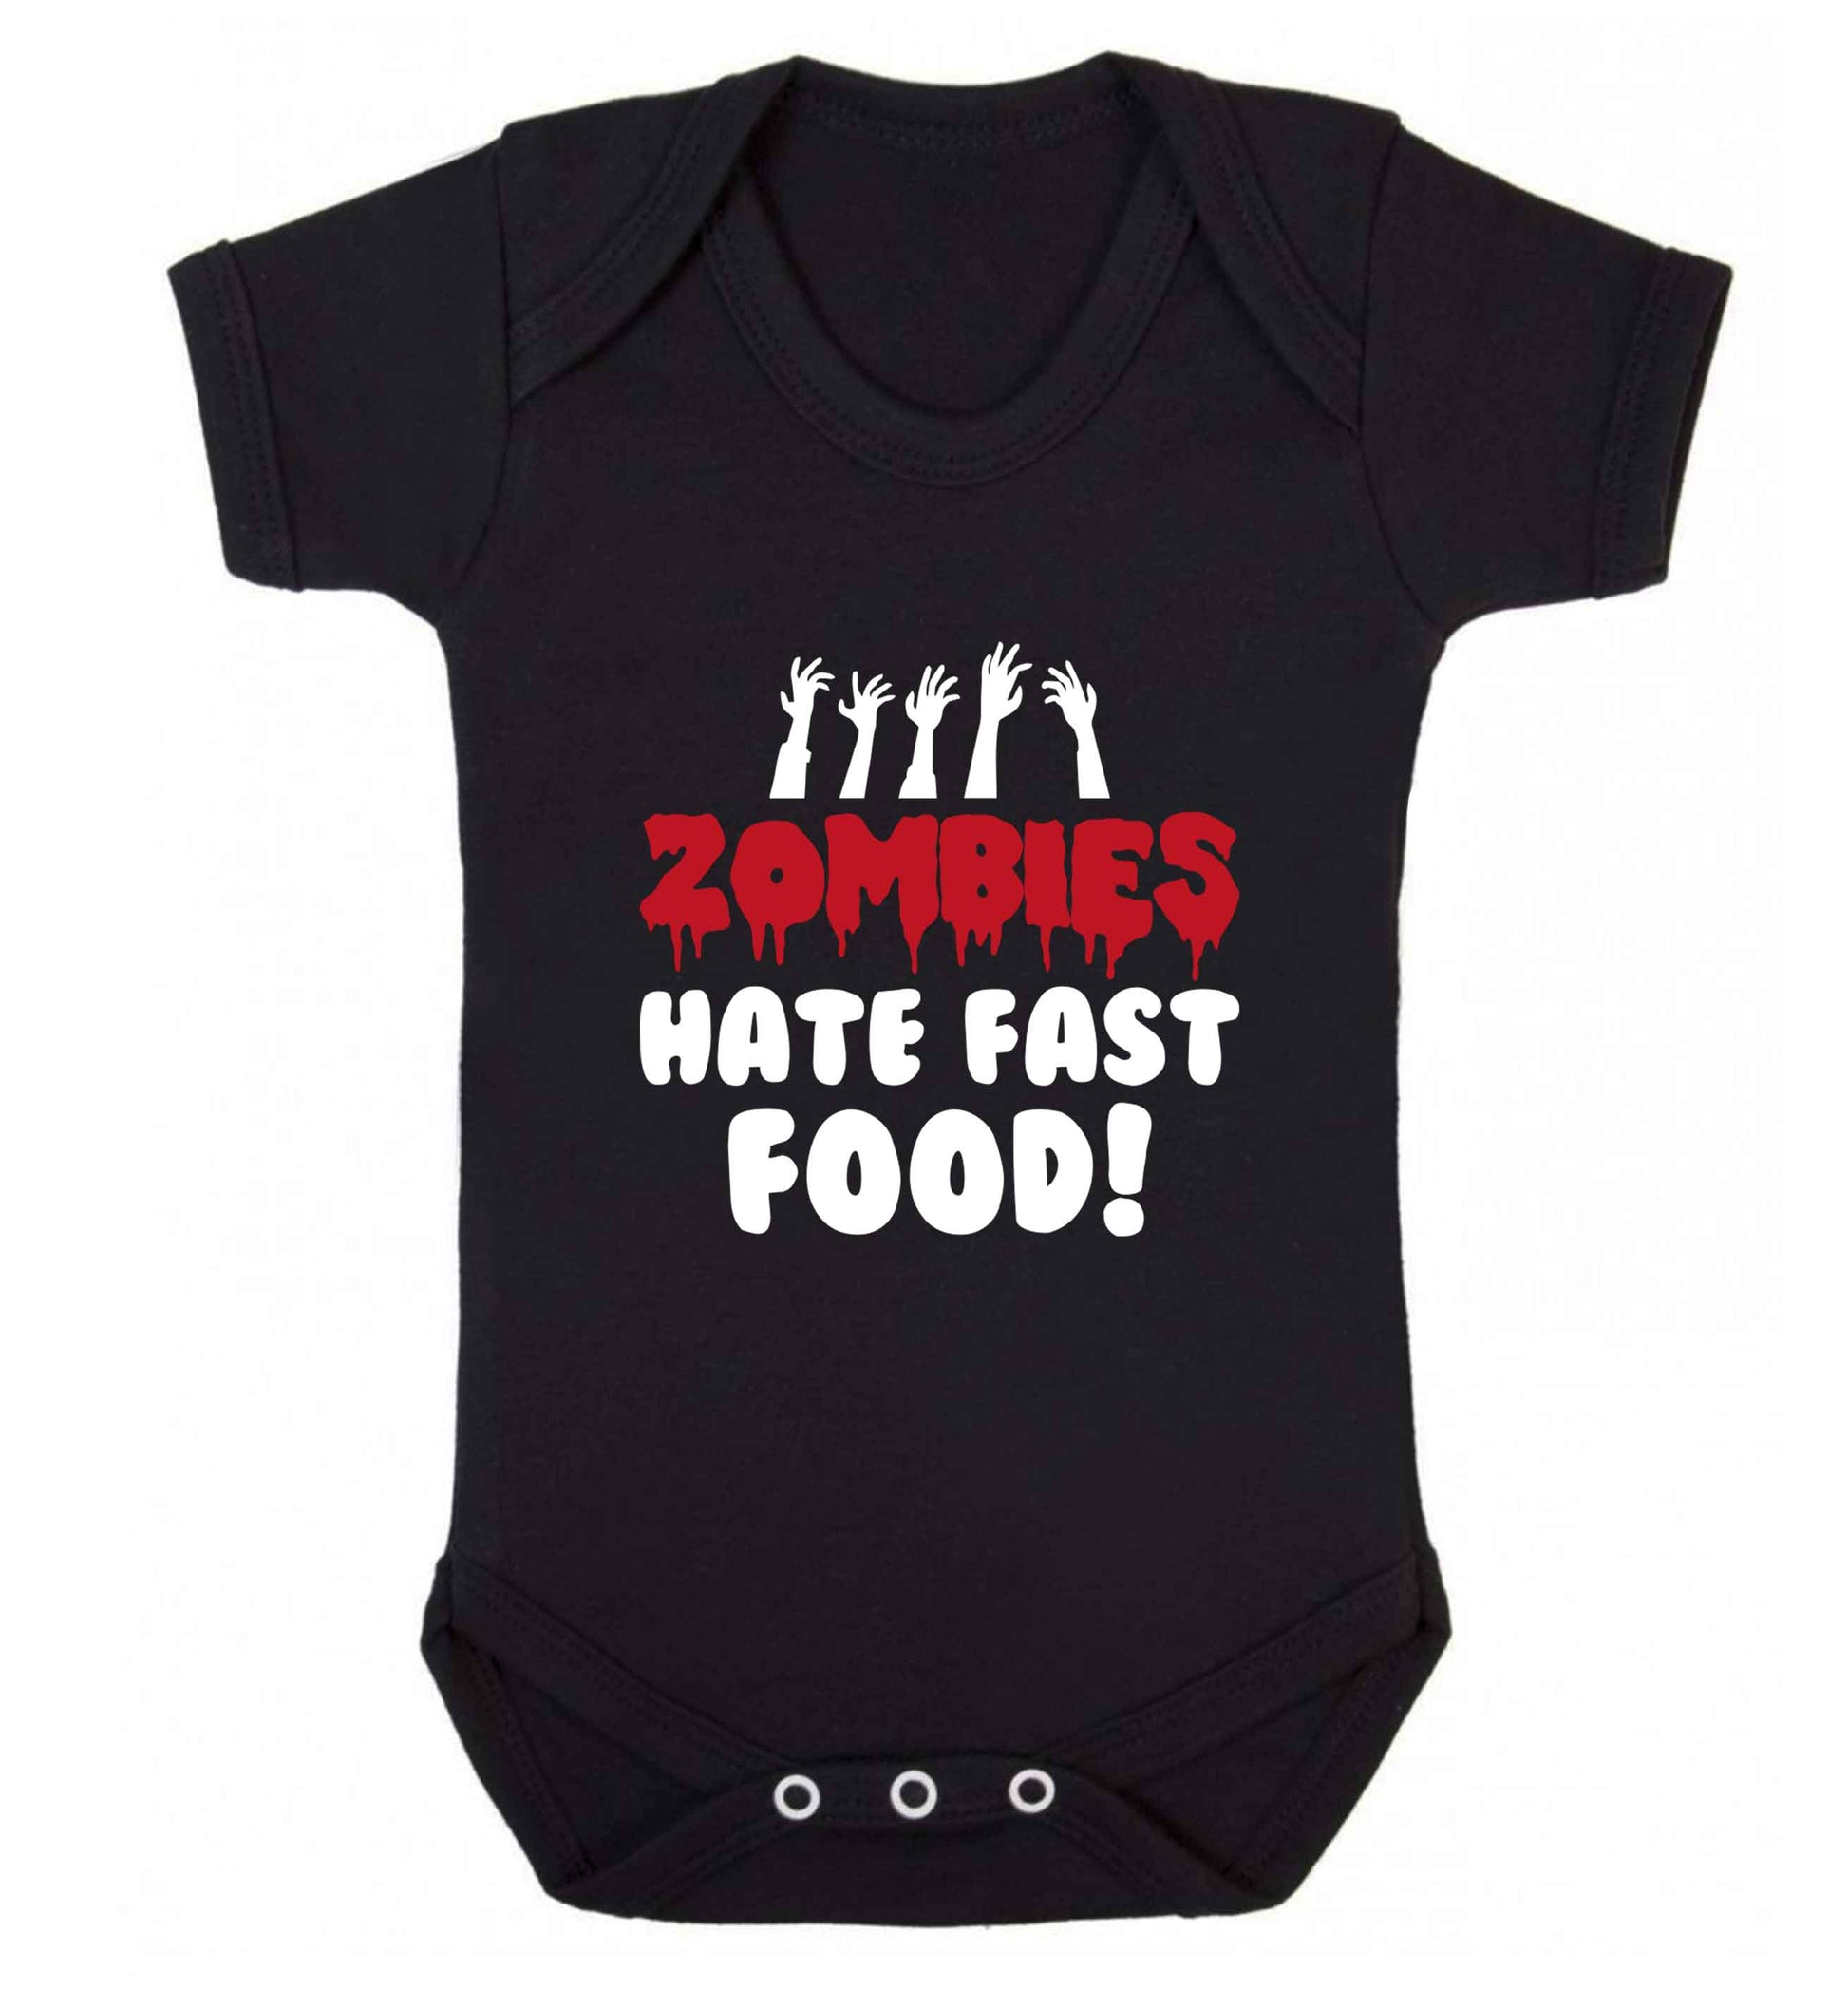 Zombies hate fast food baby vest black 18-24 months